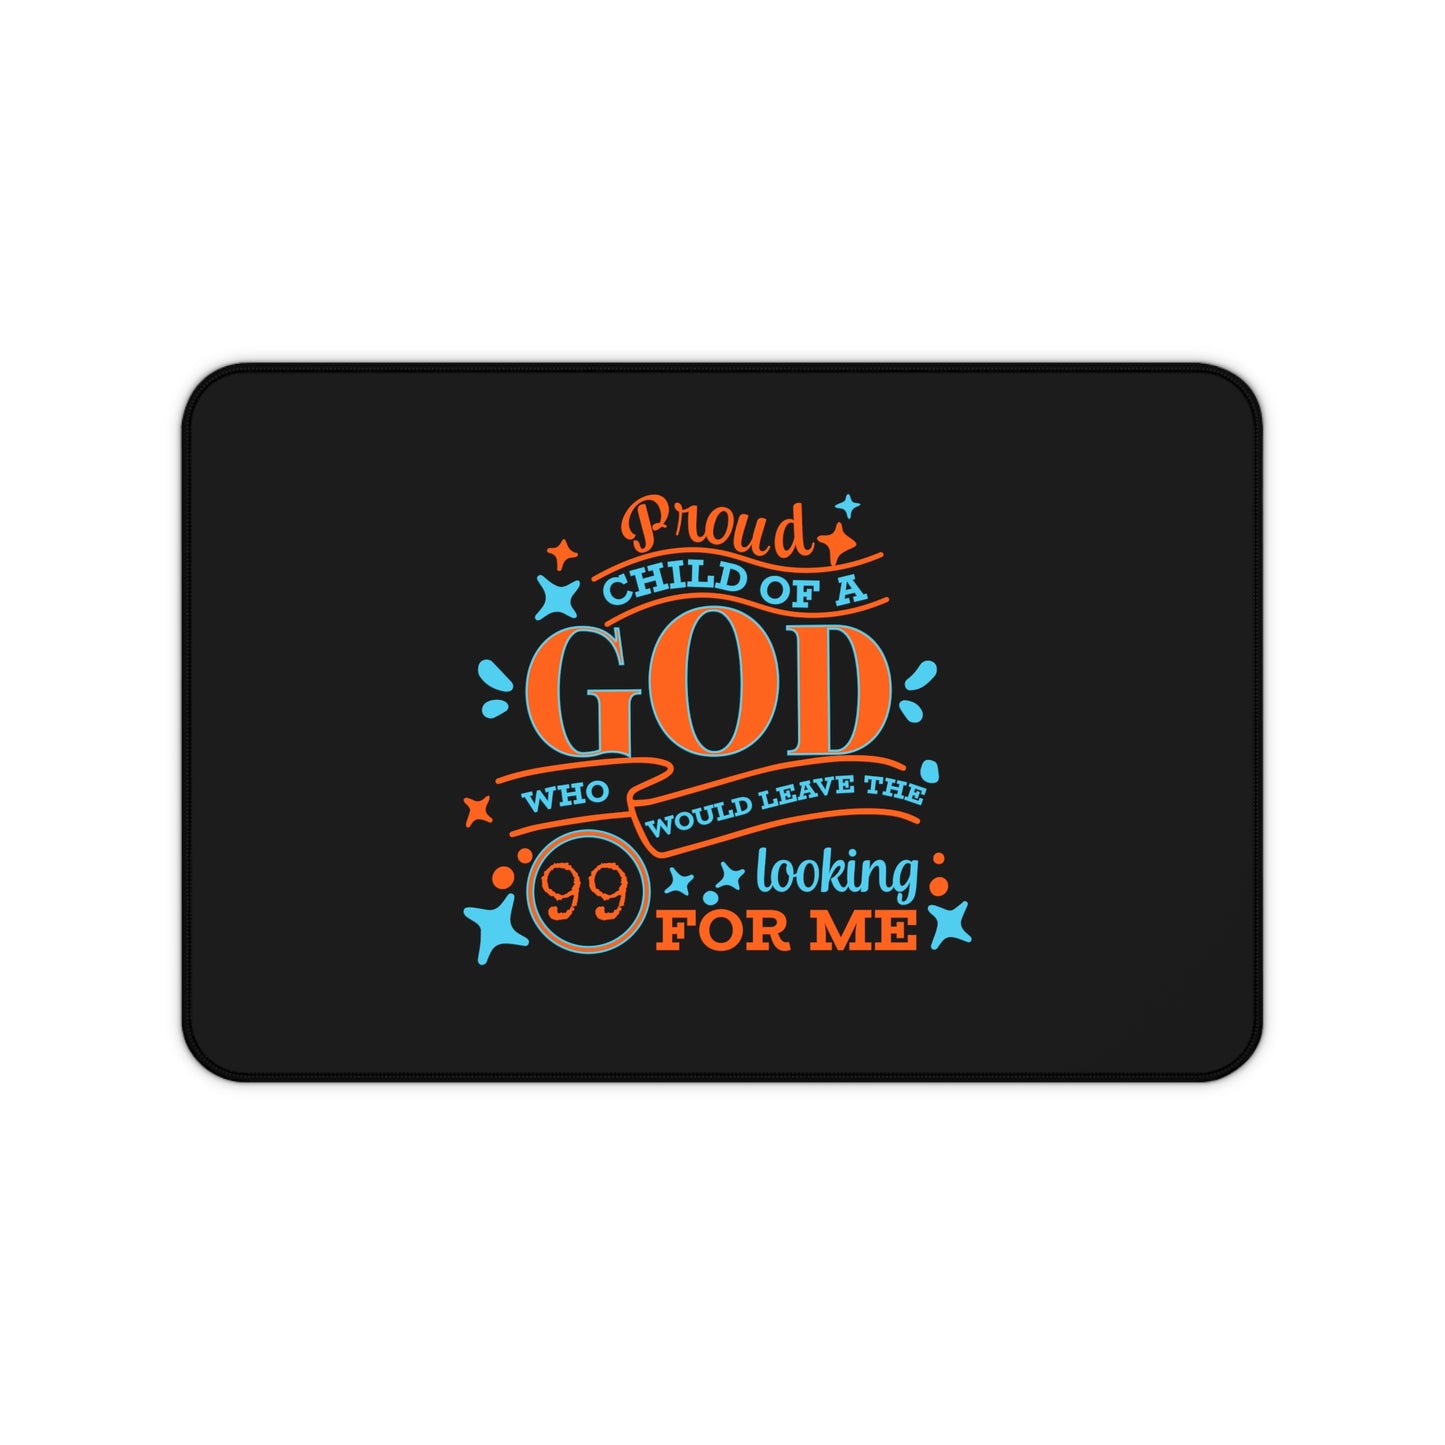 Proud Child Of A God Who Would Leave The 99 Looking For Me Christian Computer Keyboard Mouse Desk Mat